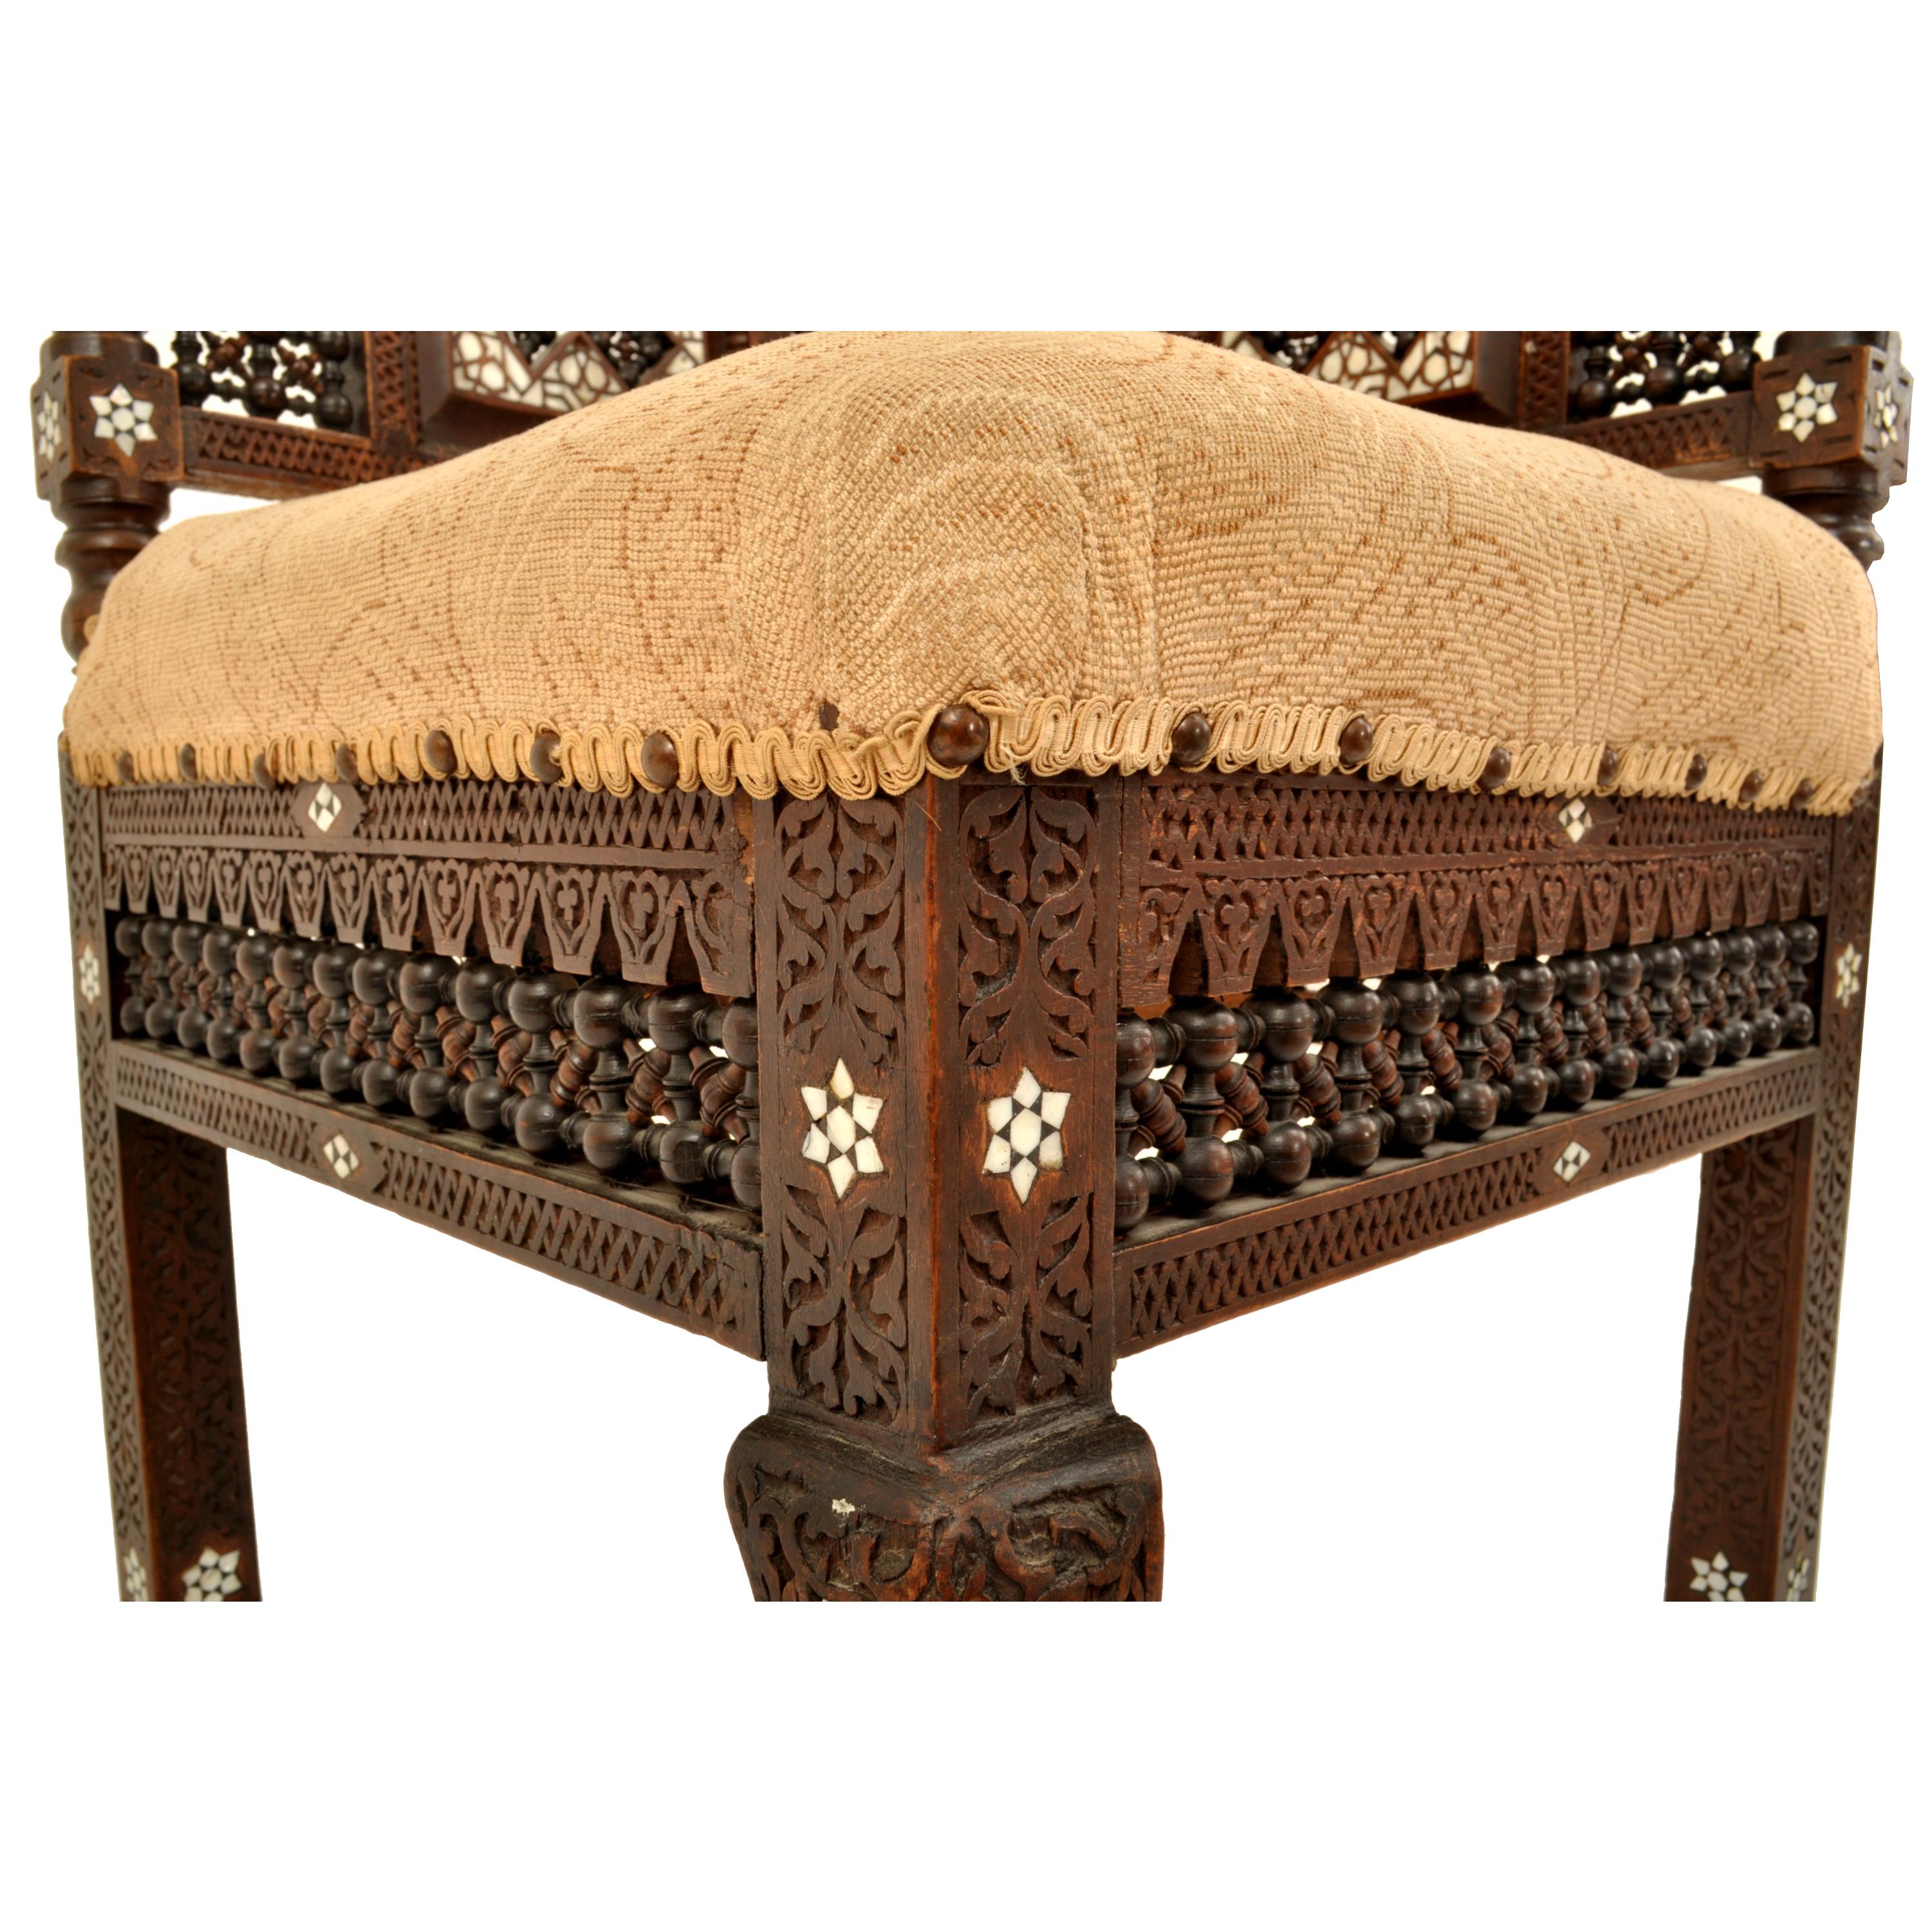 Antique Islamic Moorish Syrian Carved Inlaid Mother of Pearl Corner Chair 1880 For Sale 4